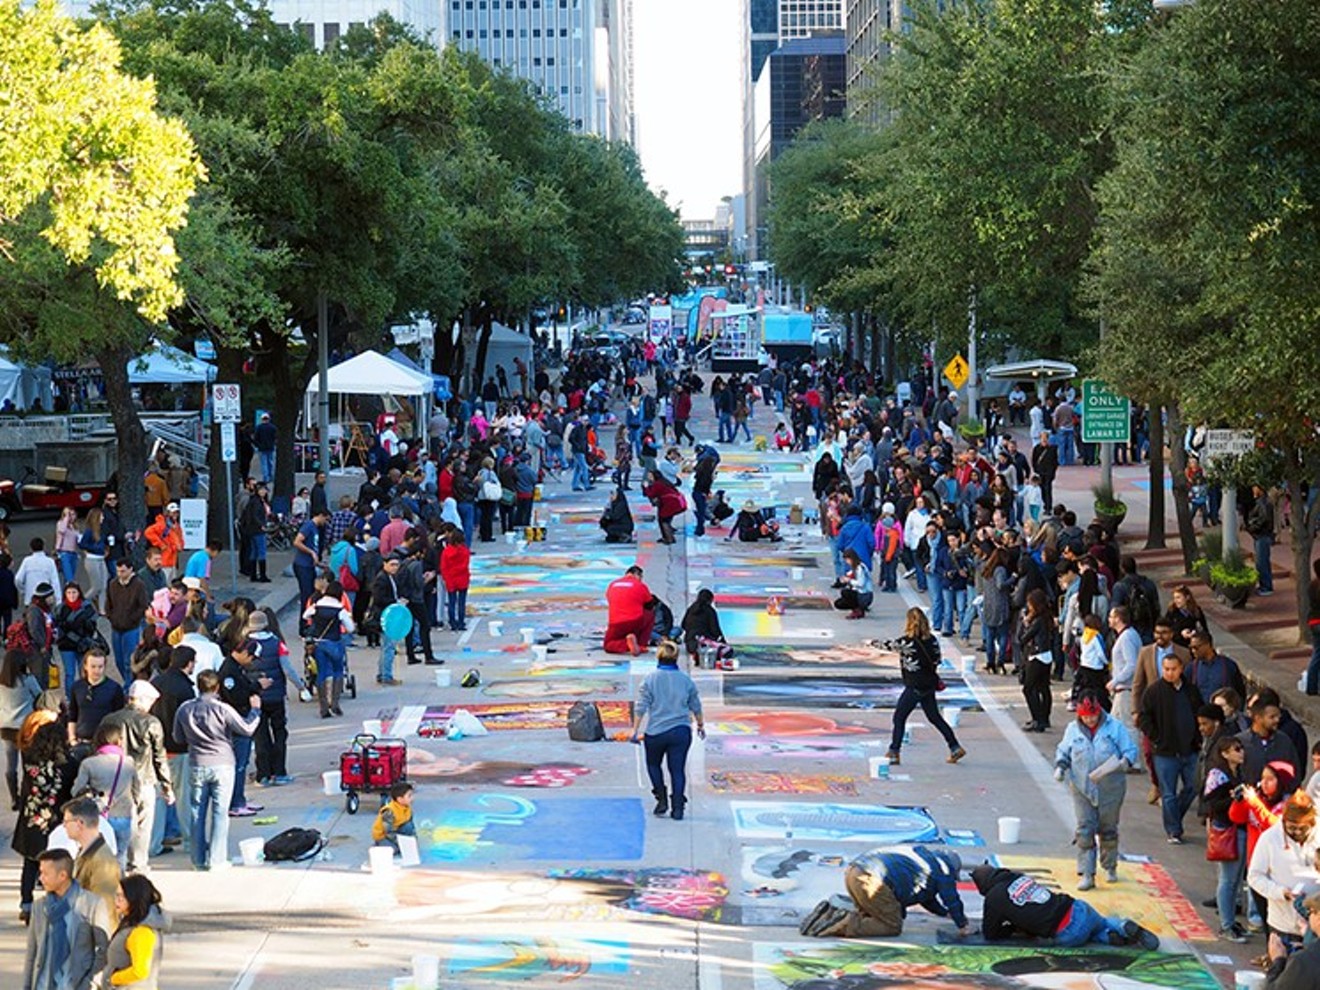 Via Colori is a street painting festival in Houston featuring more than 200 artists using pastel chalks to create amazing, if transitory, works of art.